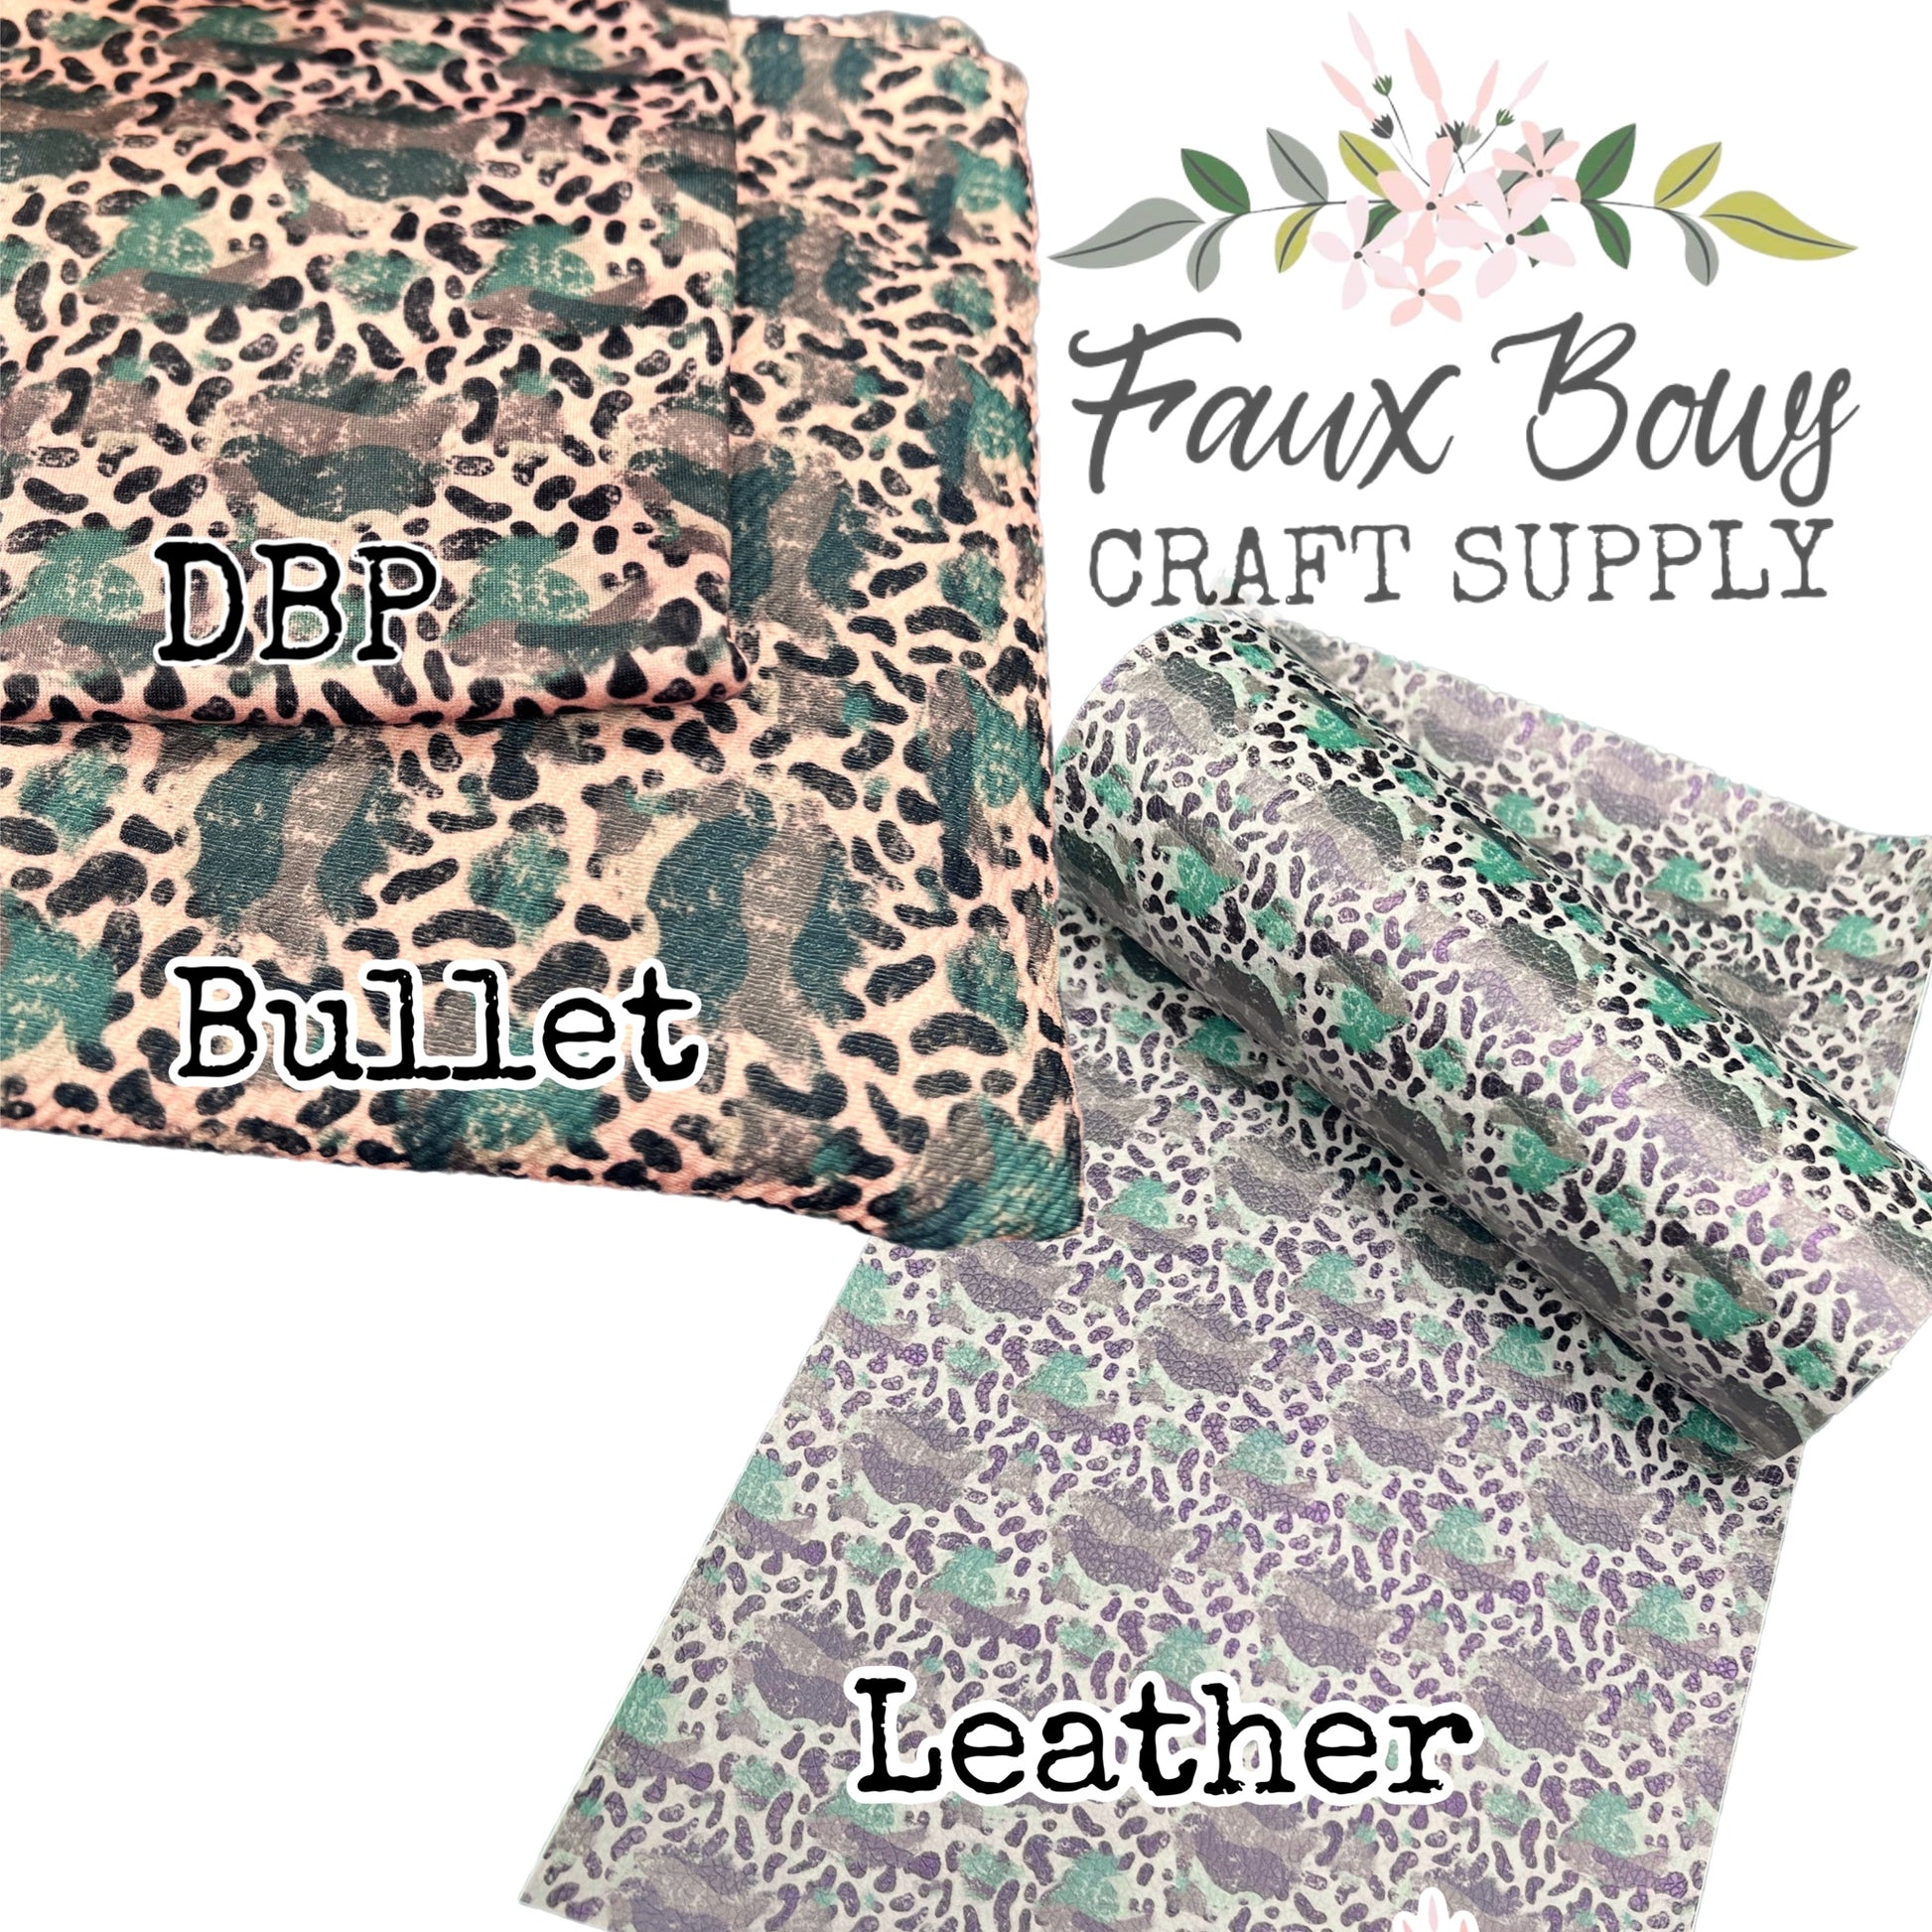 Cheetah Camo Printed Fabric- Bullet/DBP/Leather – Faux Bows Craft Supply